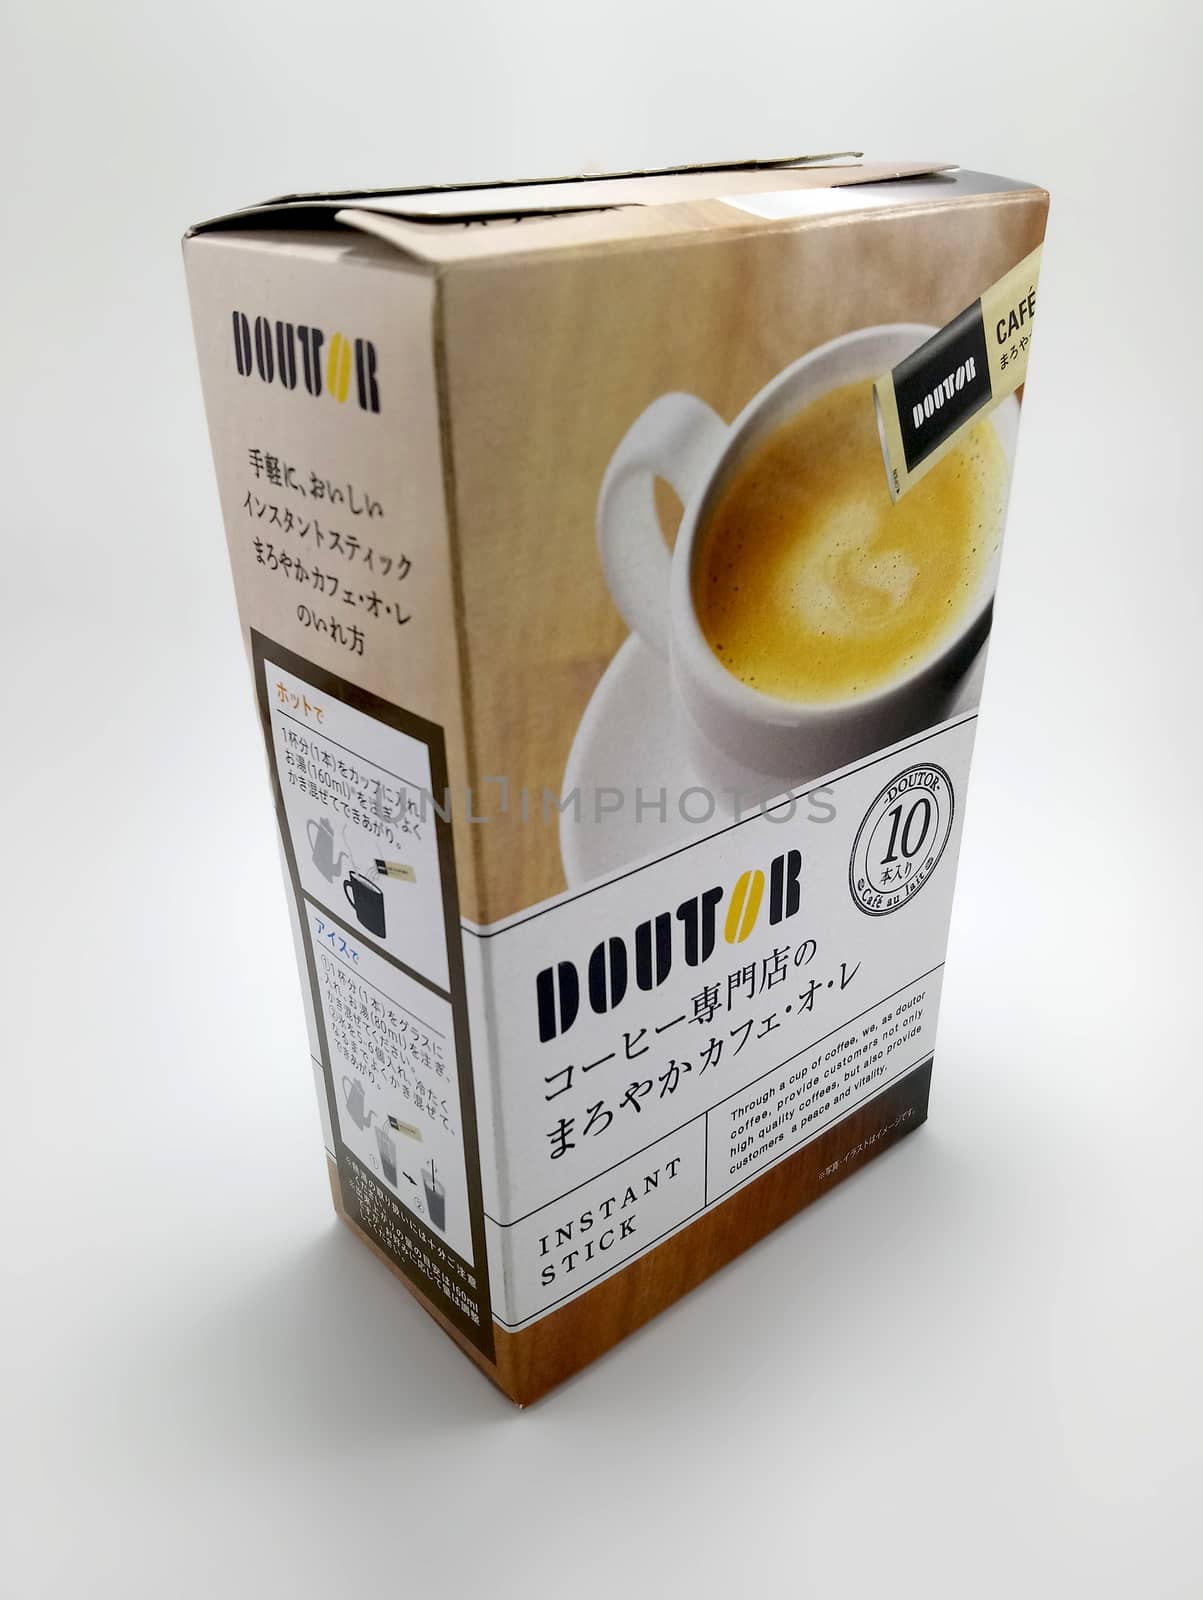 Doutor coffee instant stick in Manila, Philippines by imwaltersy